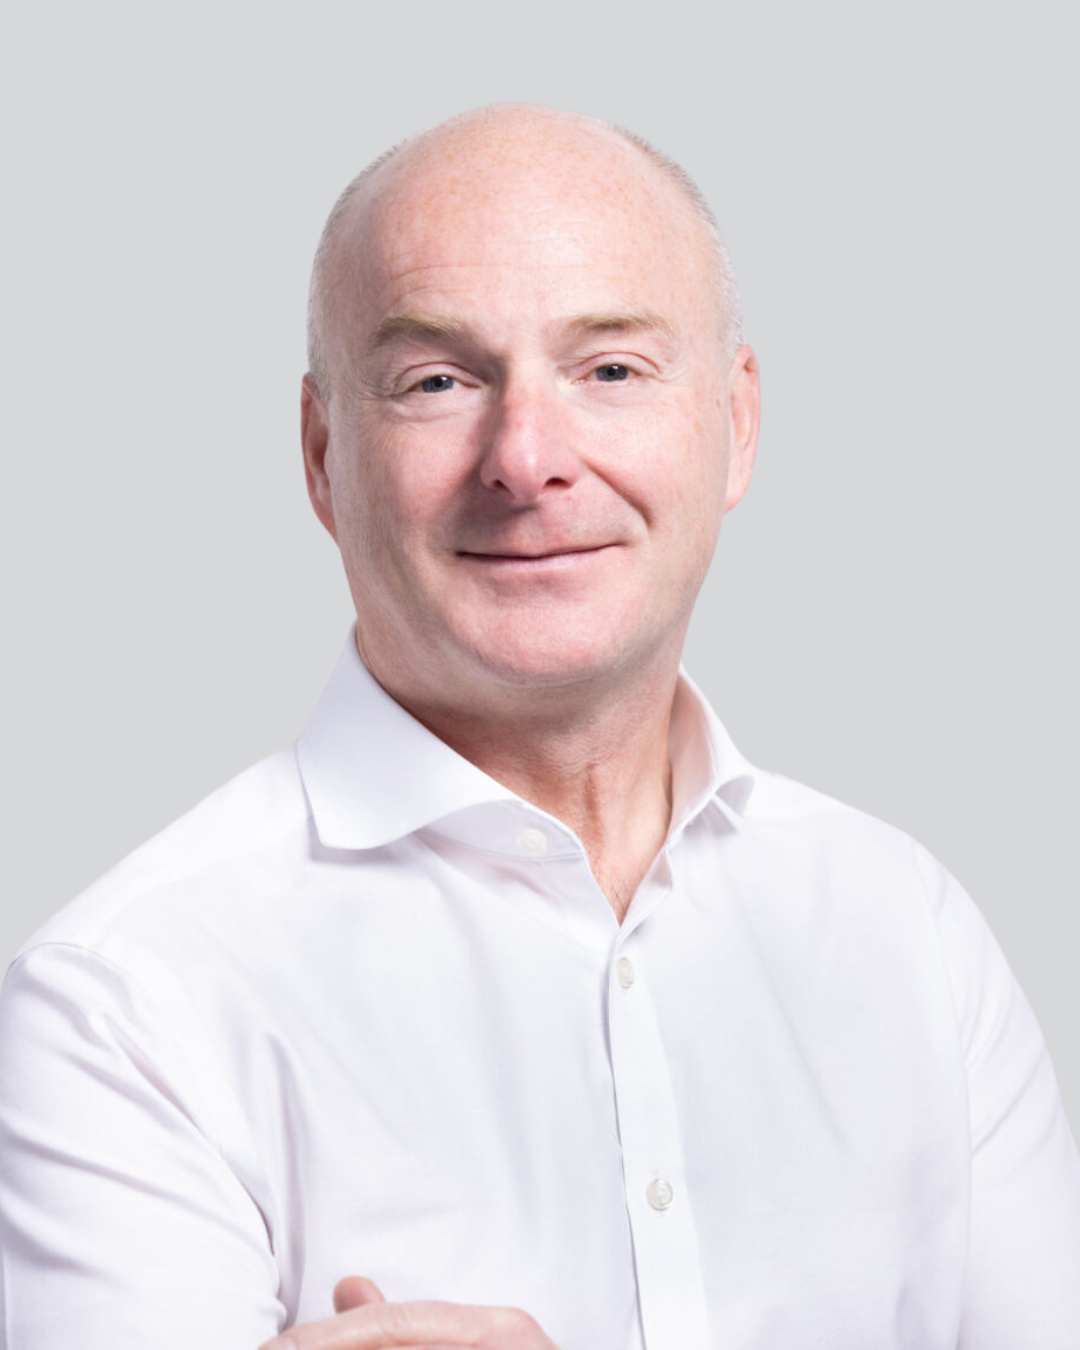 Picture of Martin Balaam, CEO and Founder at Pimberly